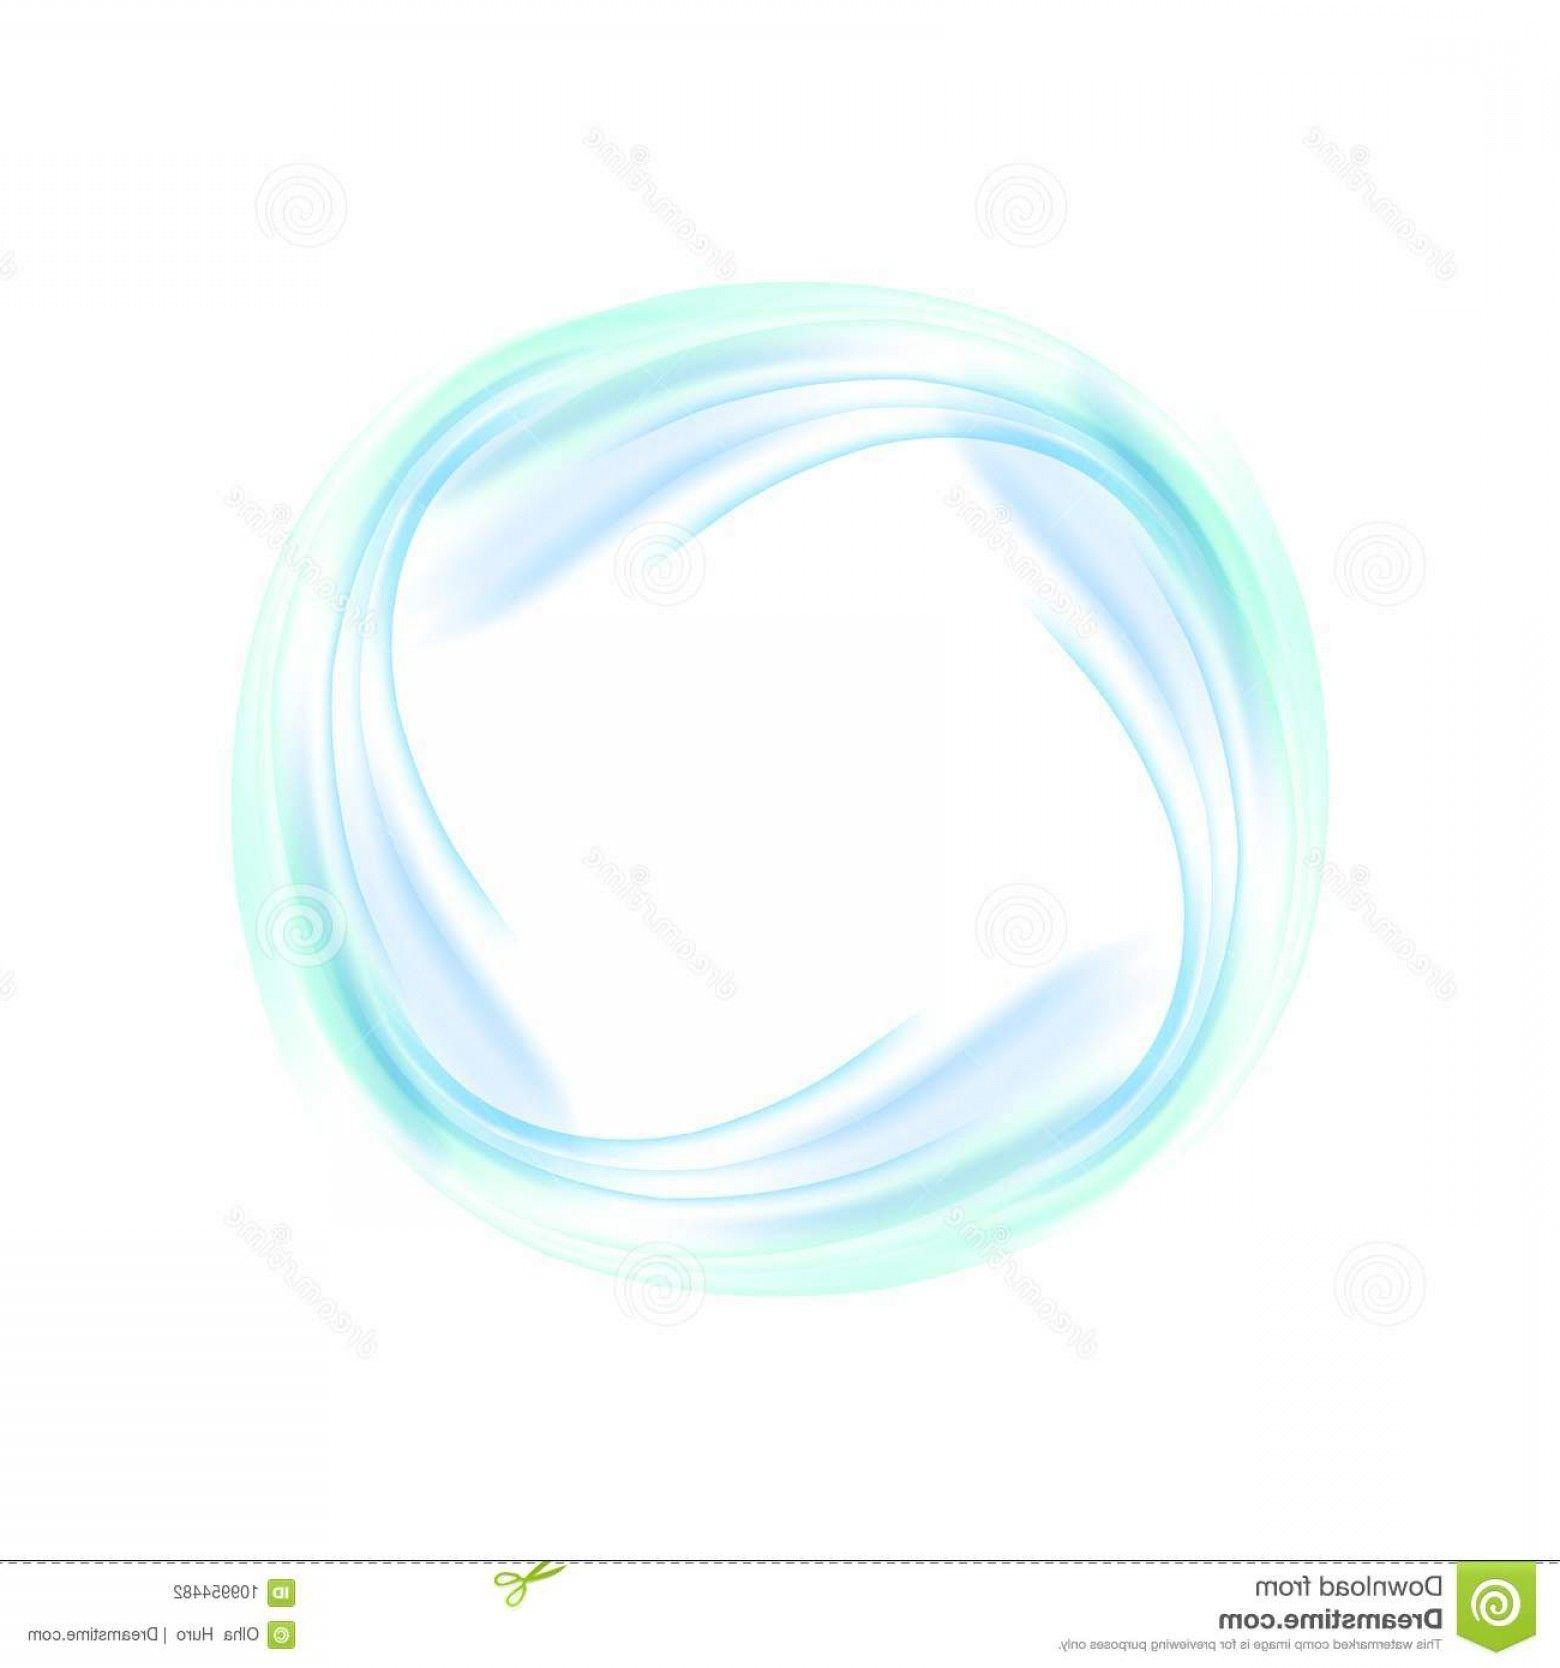 Blue Swirl Circle Logo - Circle Swirl Vector at GetDrawings.com | Free for personal use ...